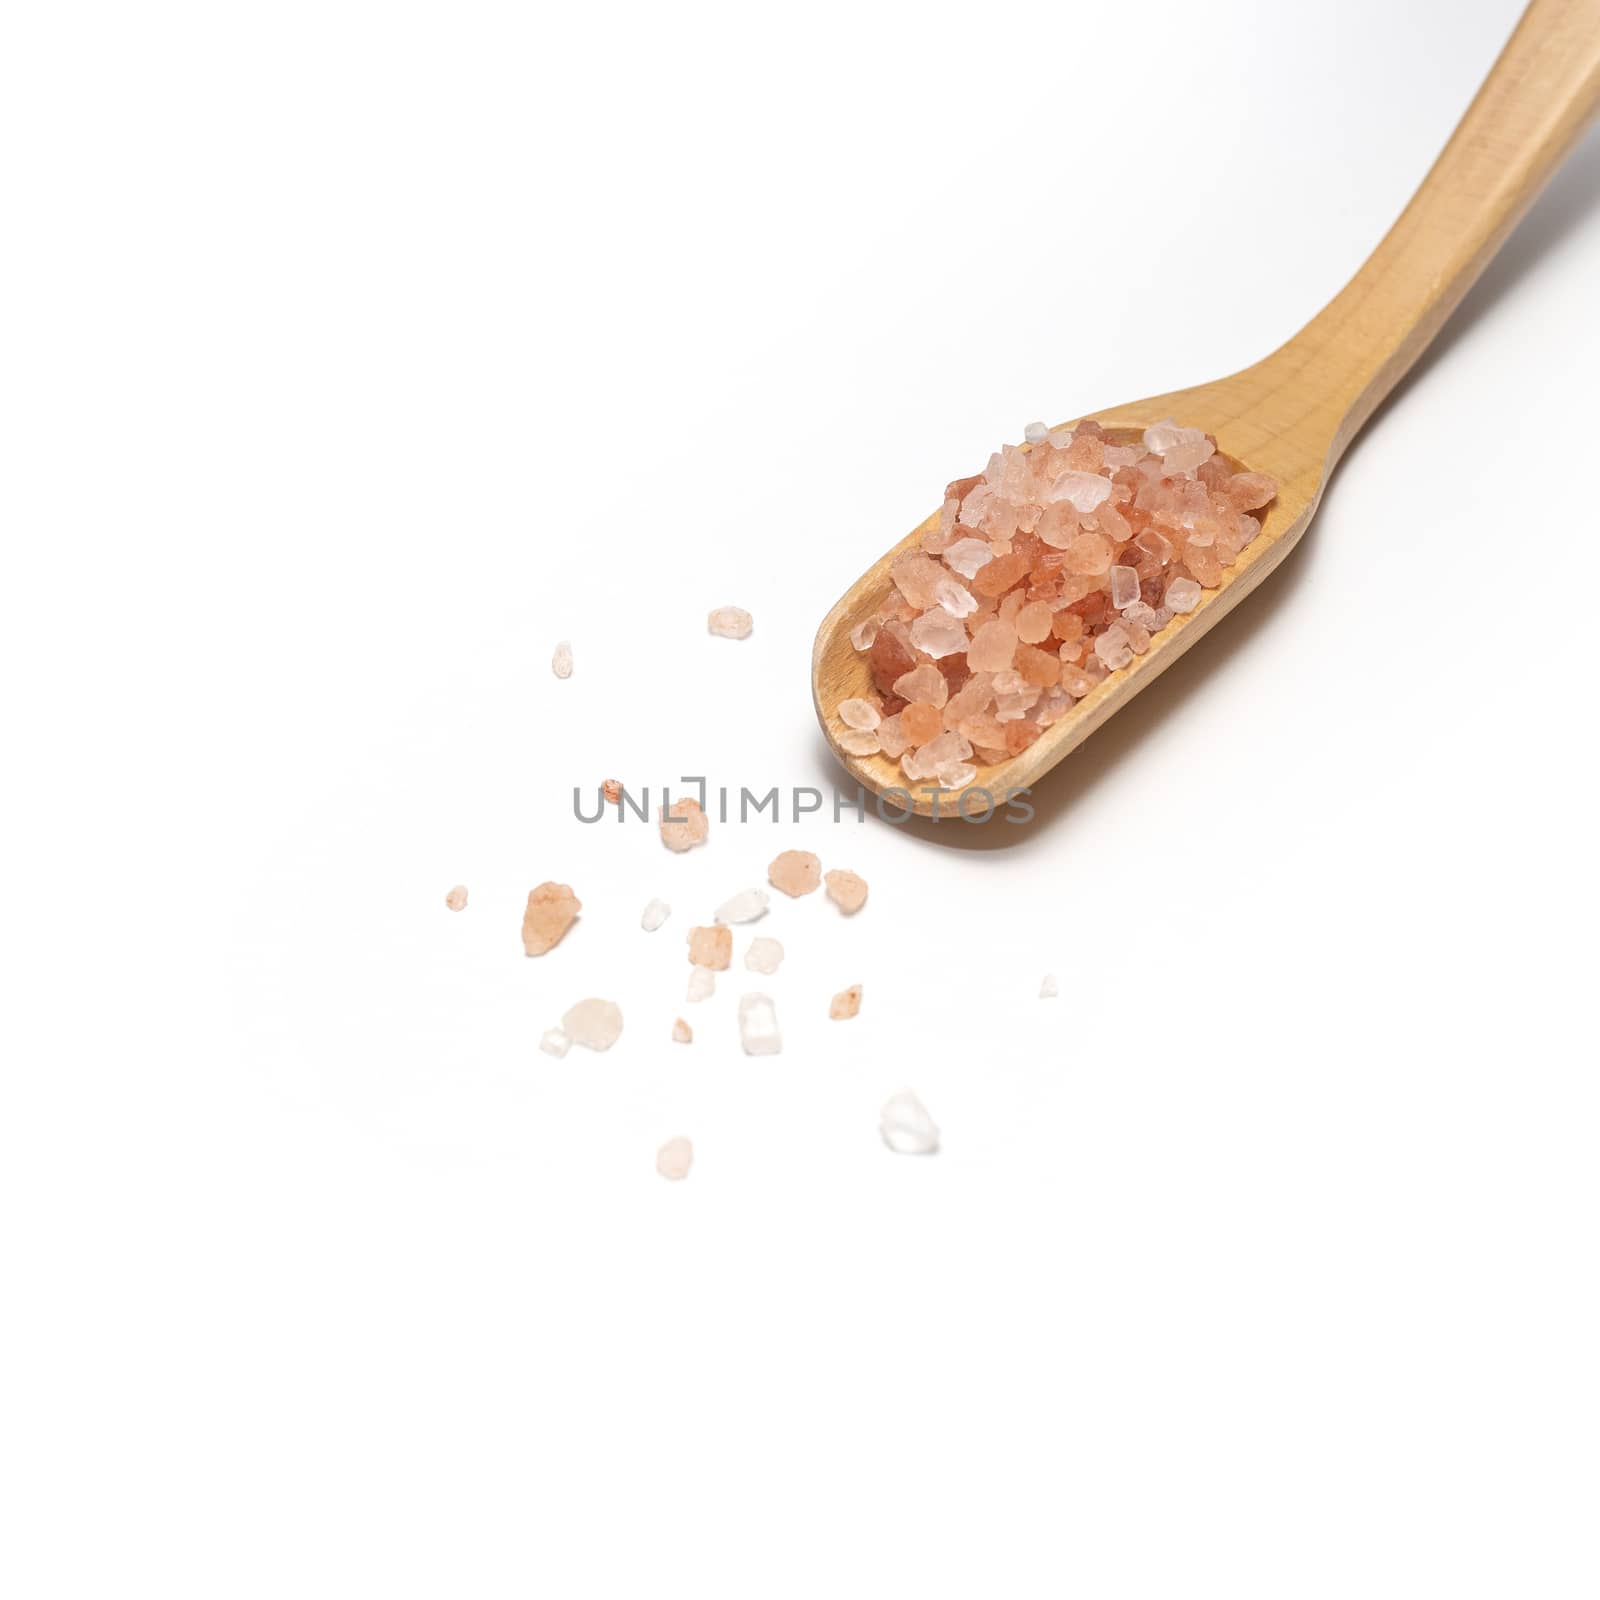 Himalayan pink salt with wooden spoon on table